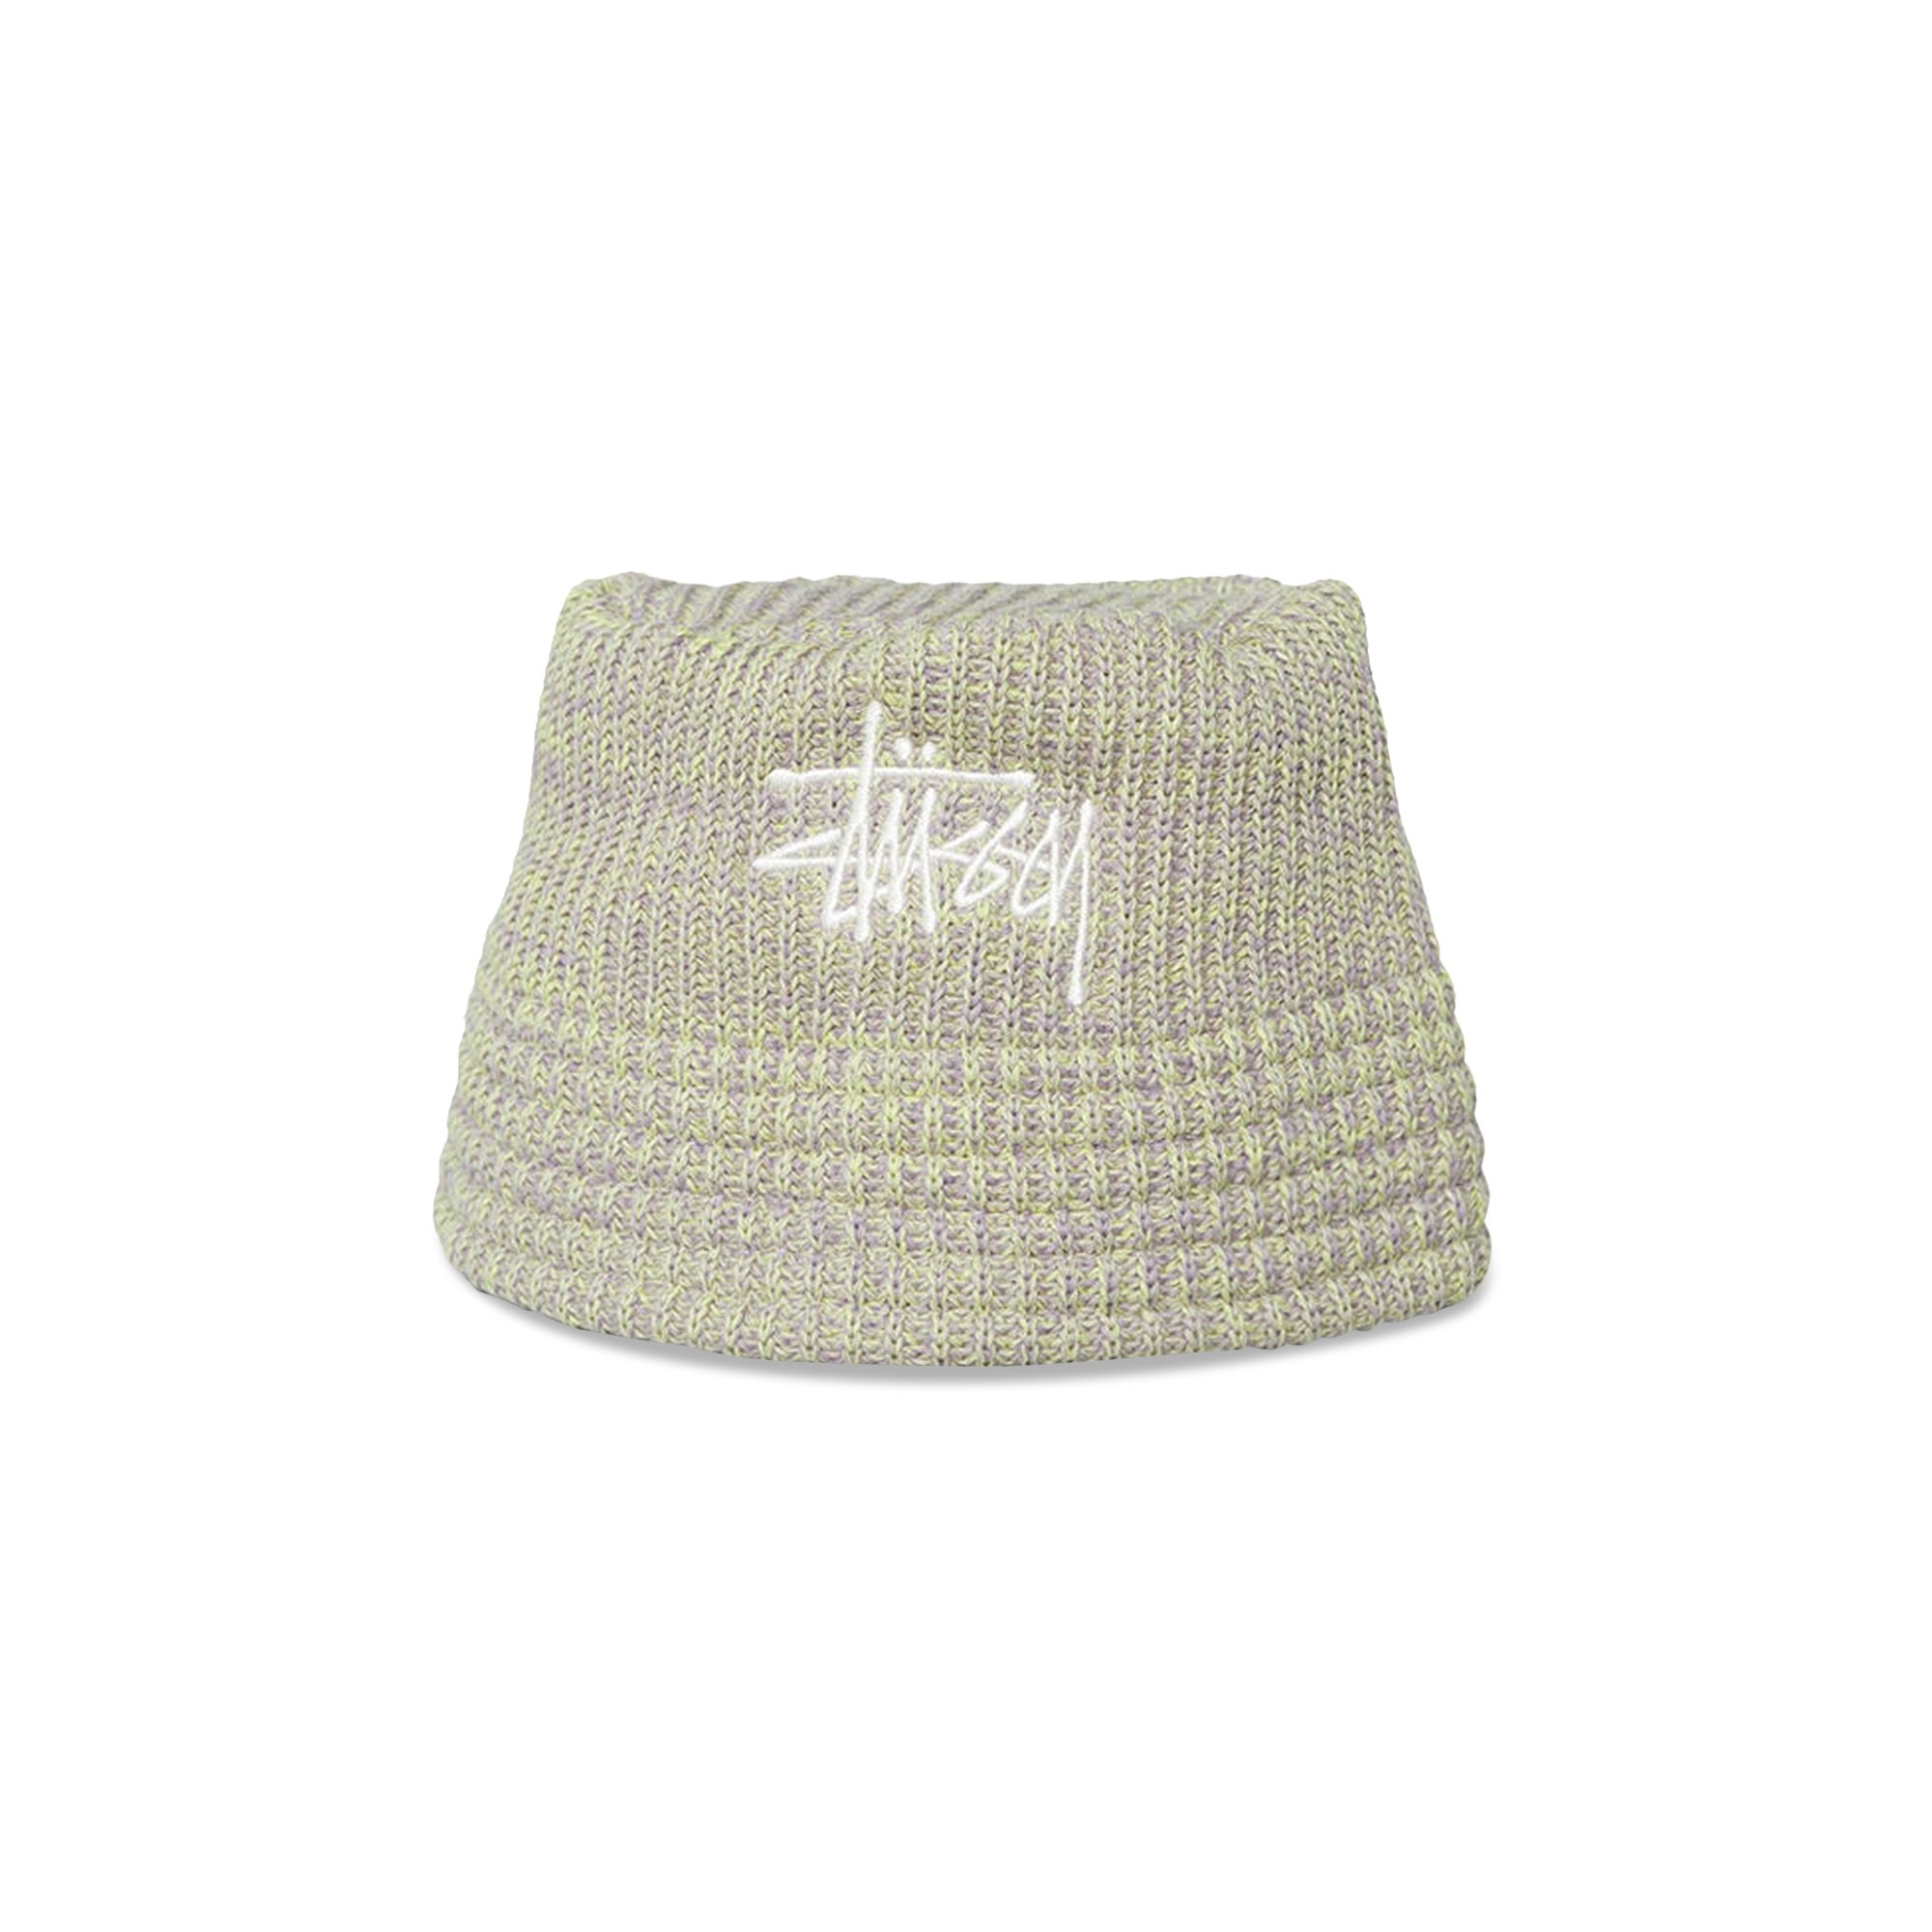 Buy Stussy Mixed Yarn Knit Bucket Hat 'Lime' - 1321074 LIME | GOAT